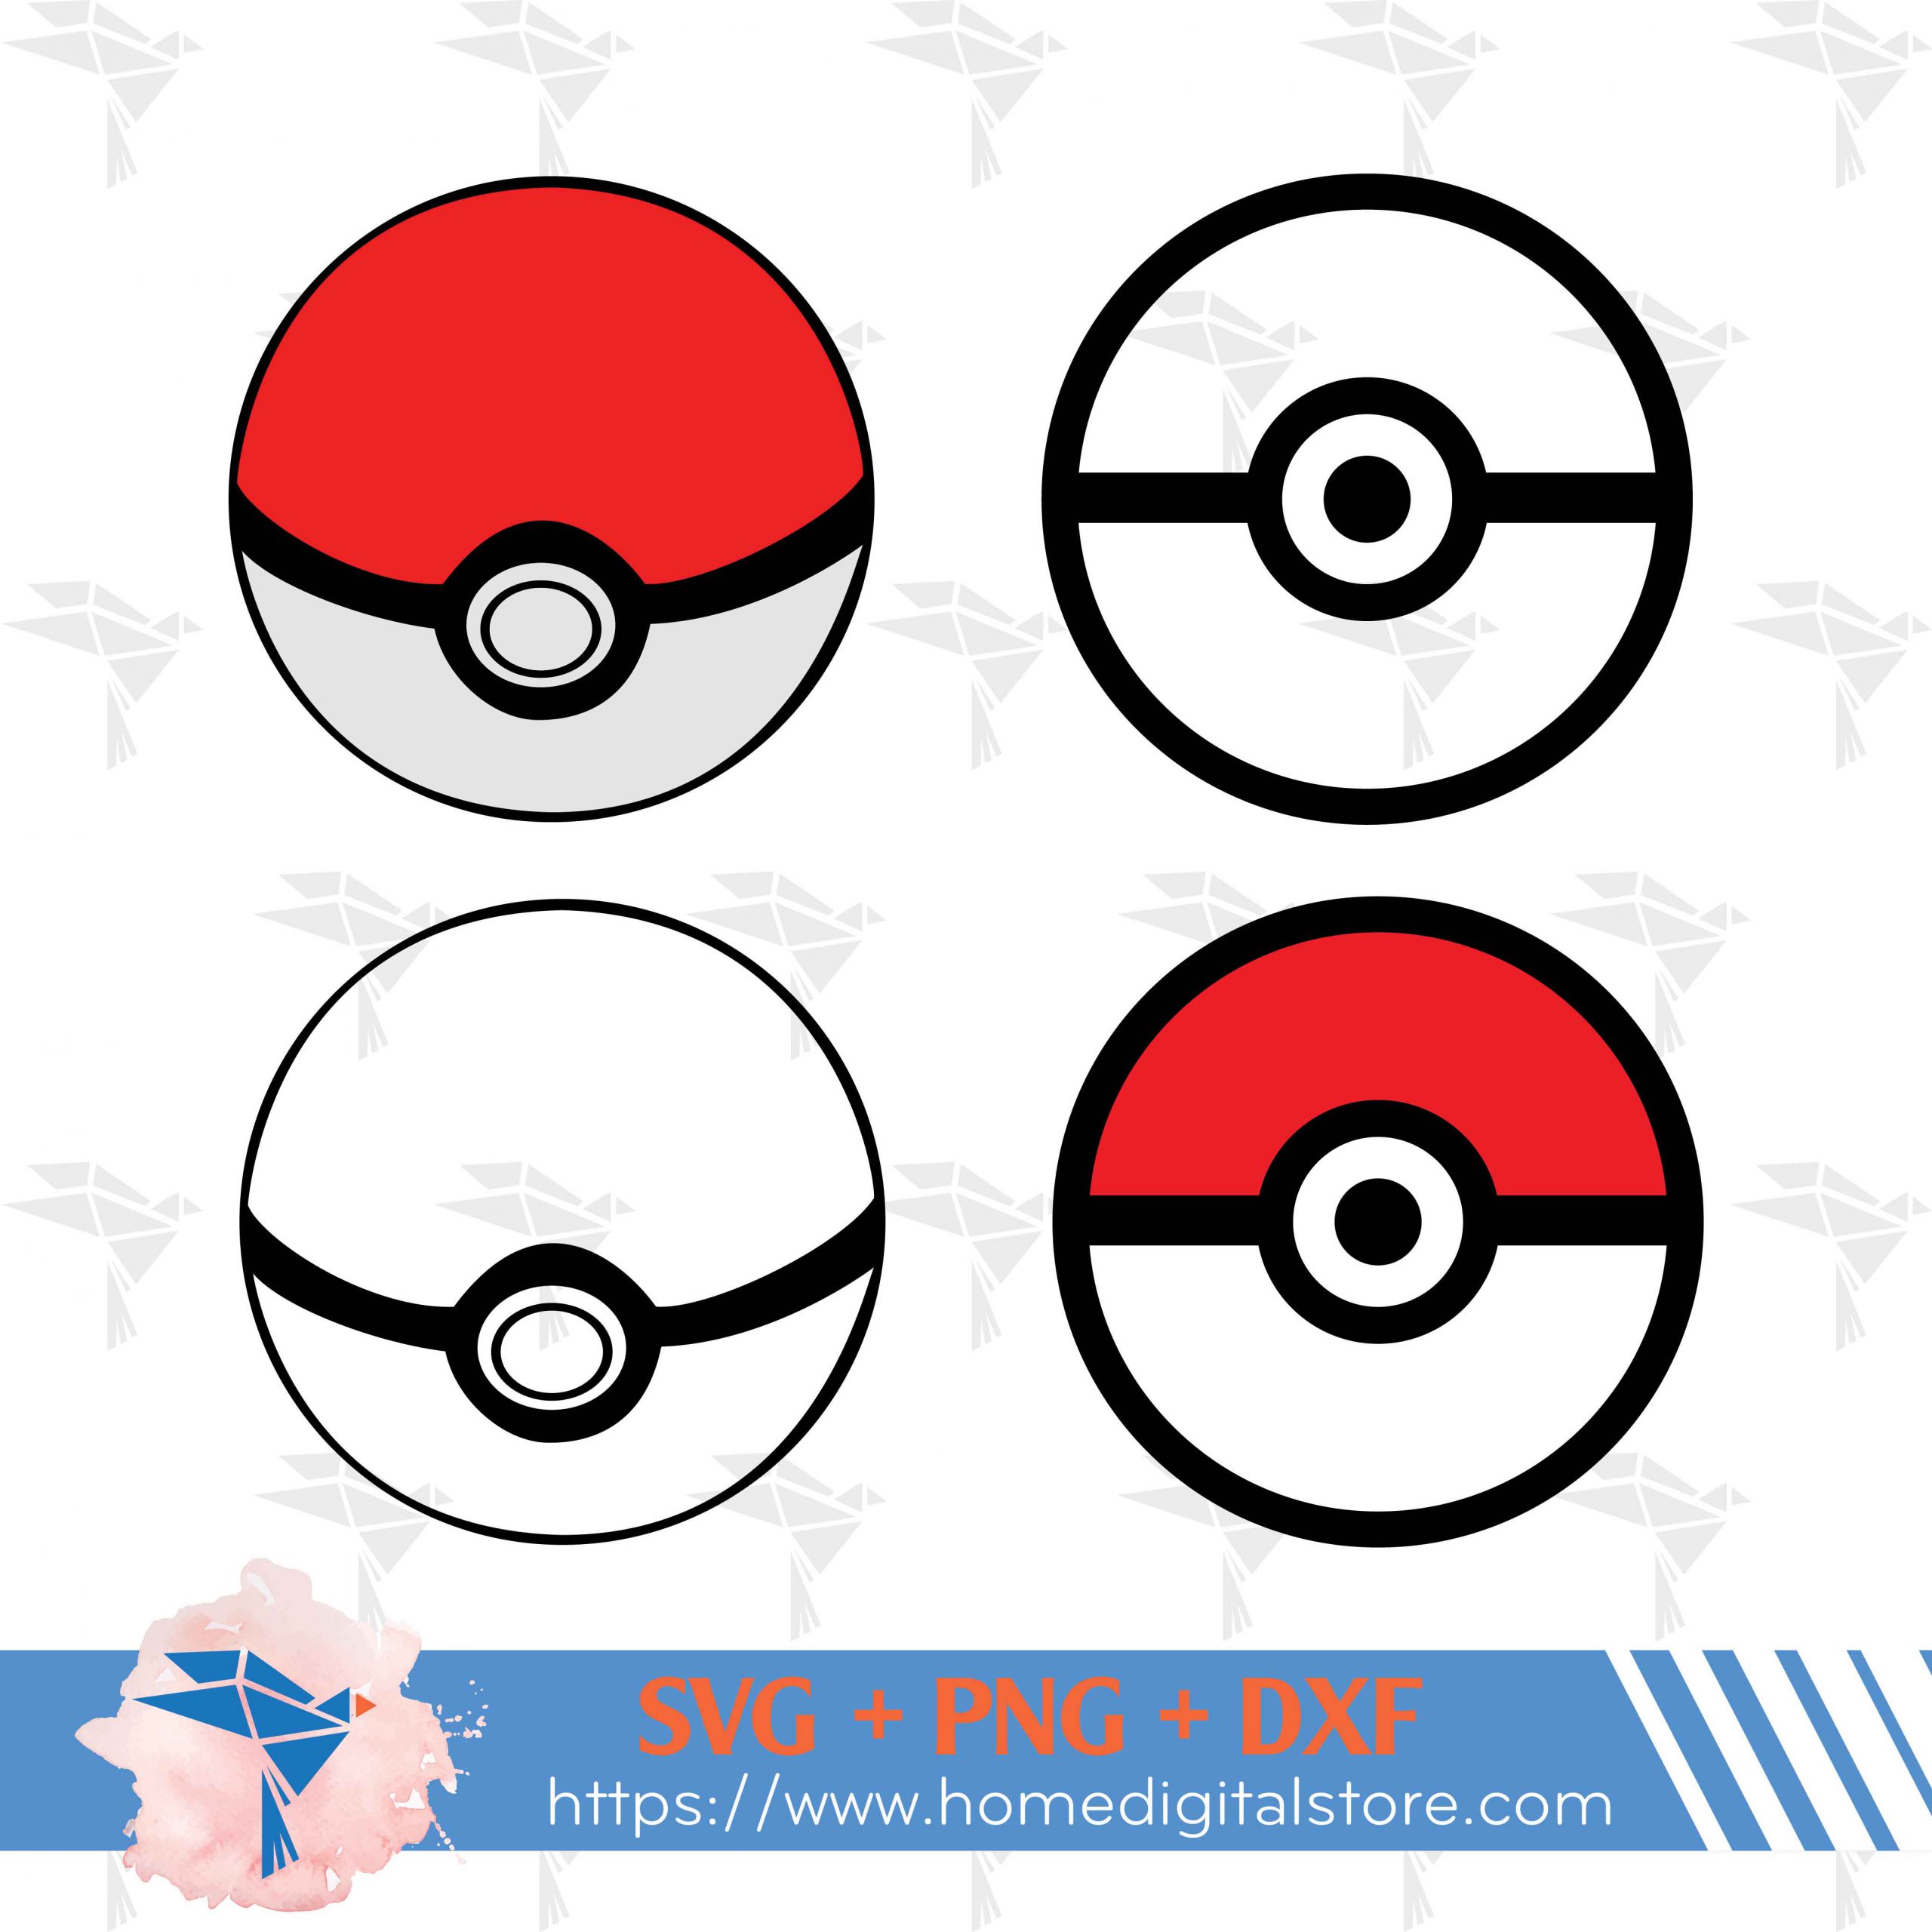 Pokemon Ball SVG, PNG, DXF Instant download files for Cricut Design Space,  Silhouette, Cutting, Printing, or more